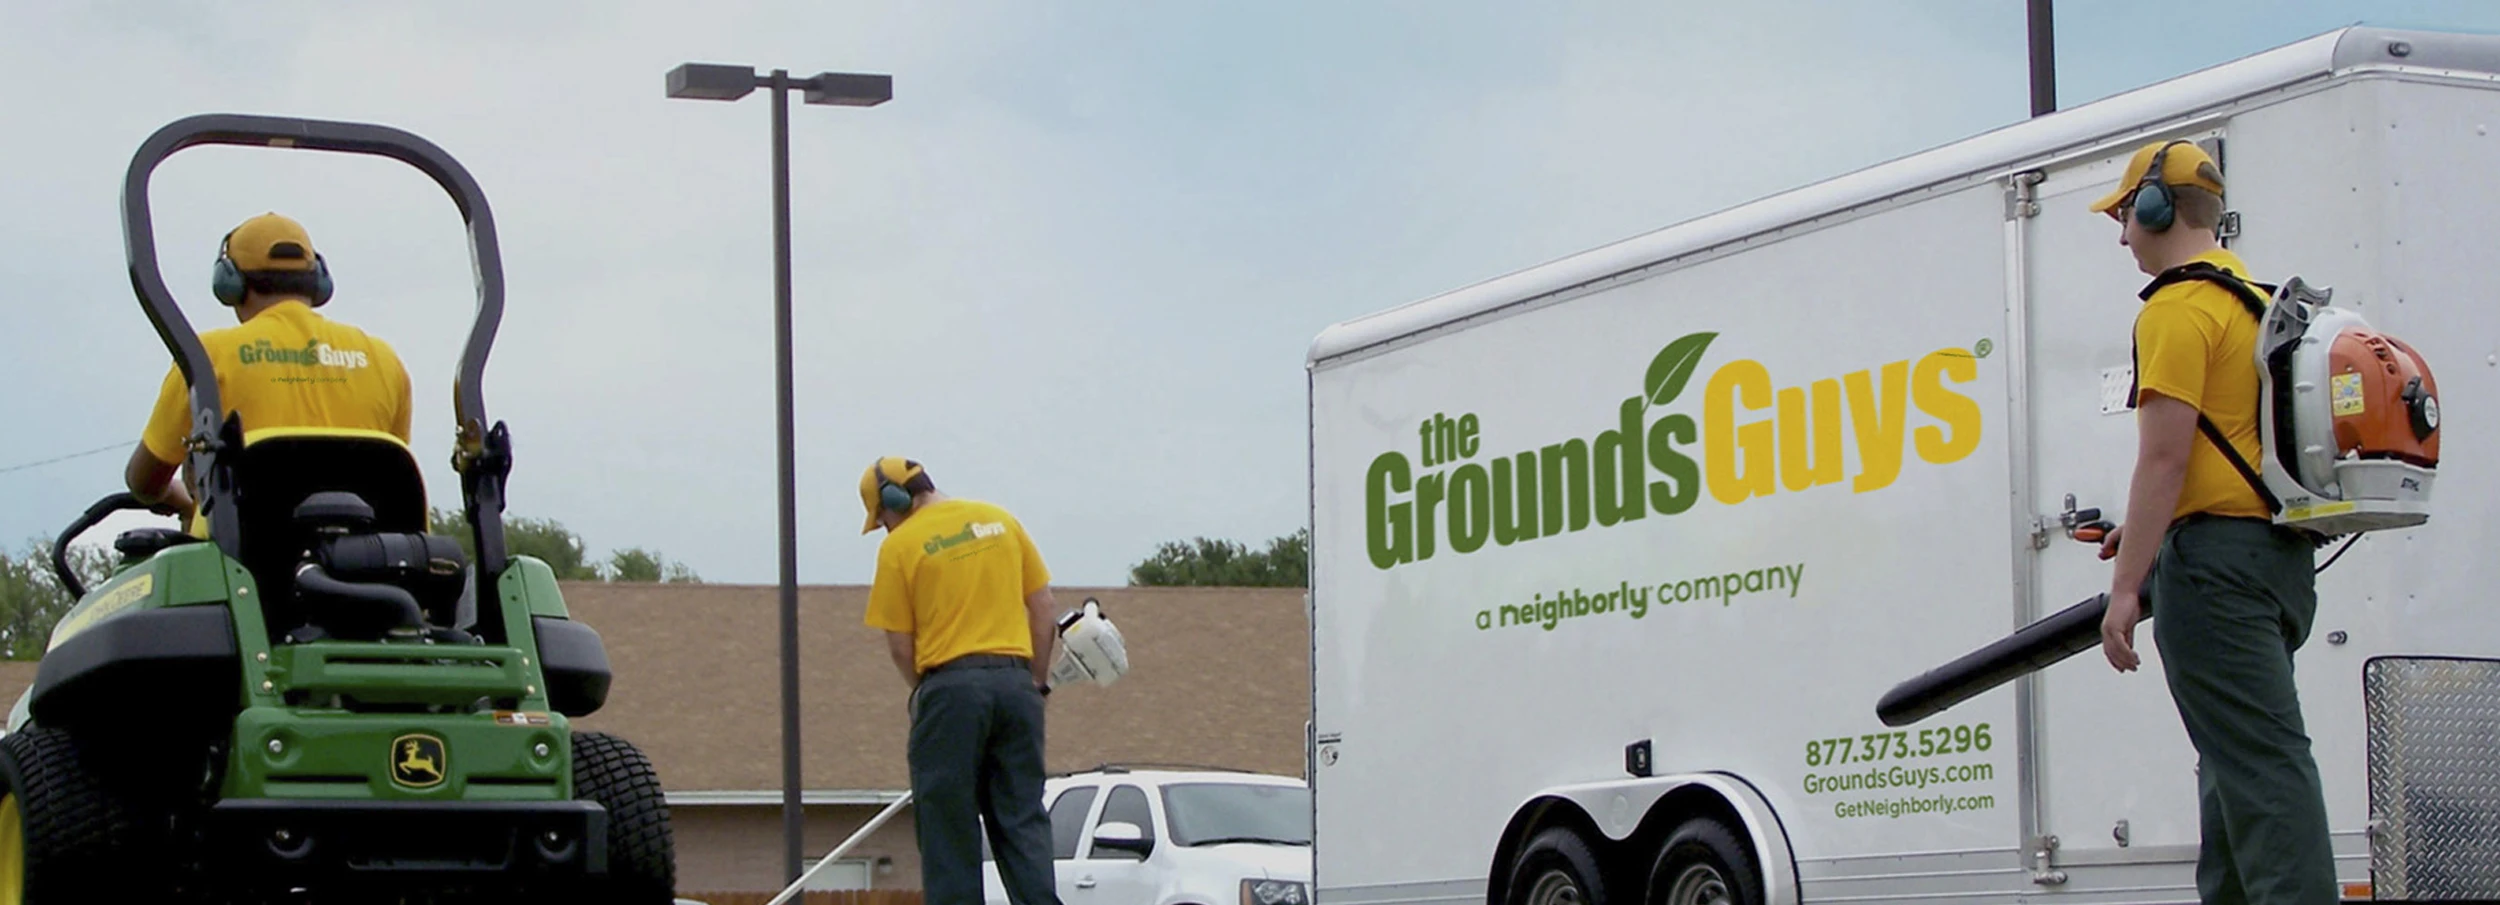 Grounds guys team with truck and equipment.